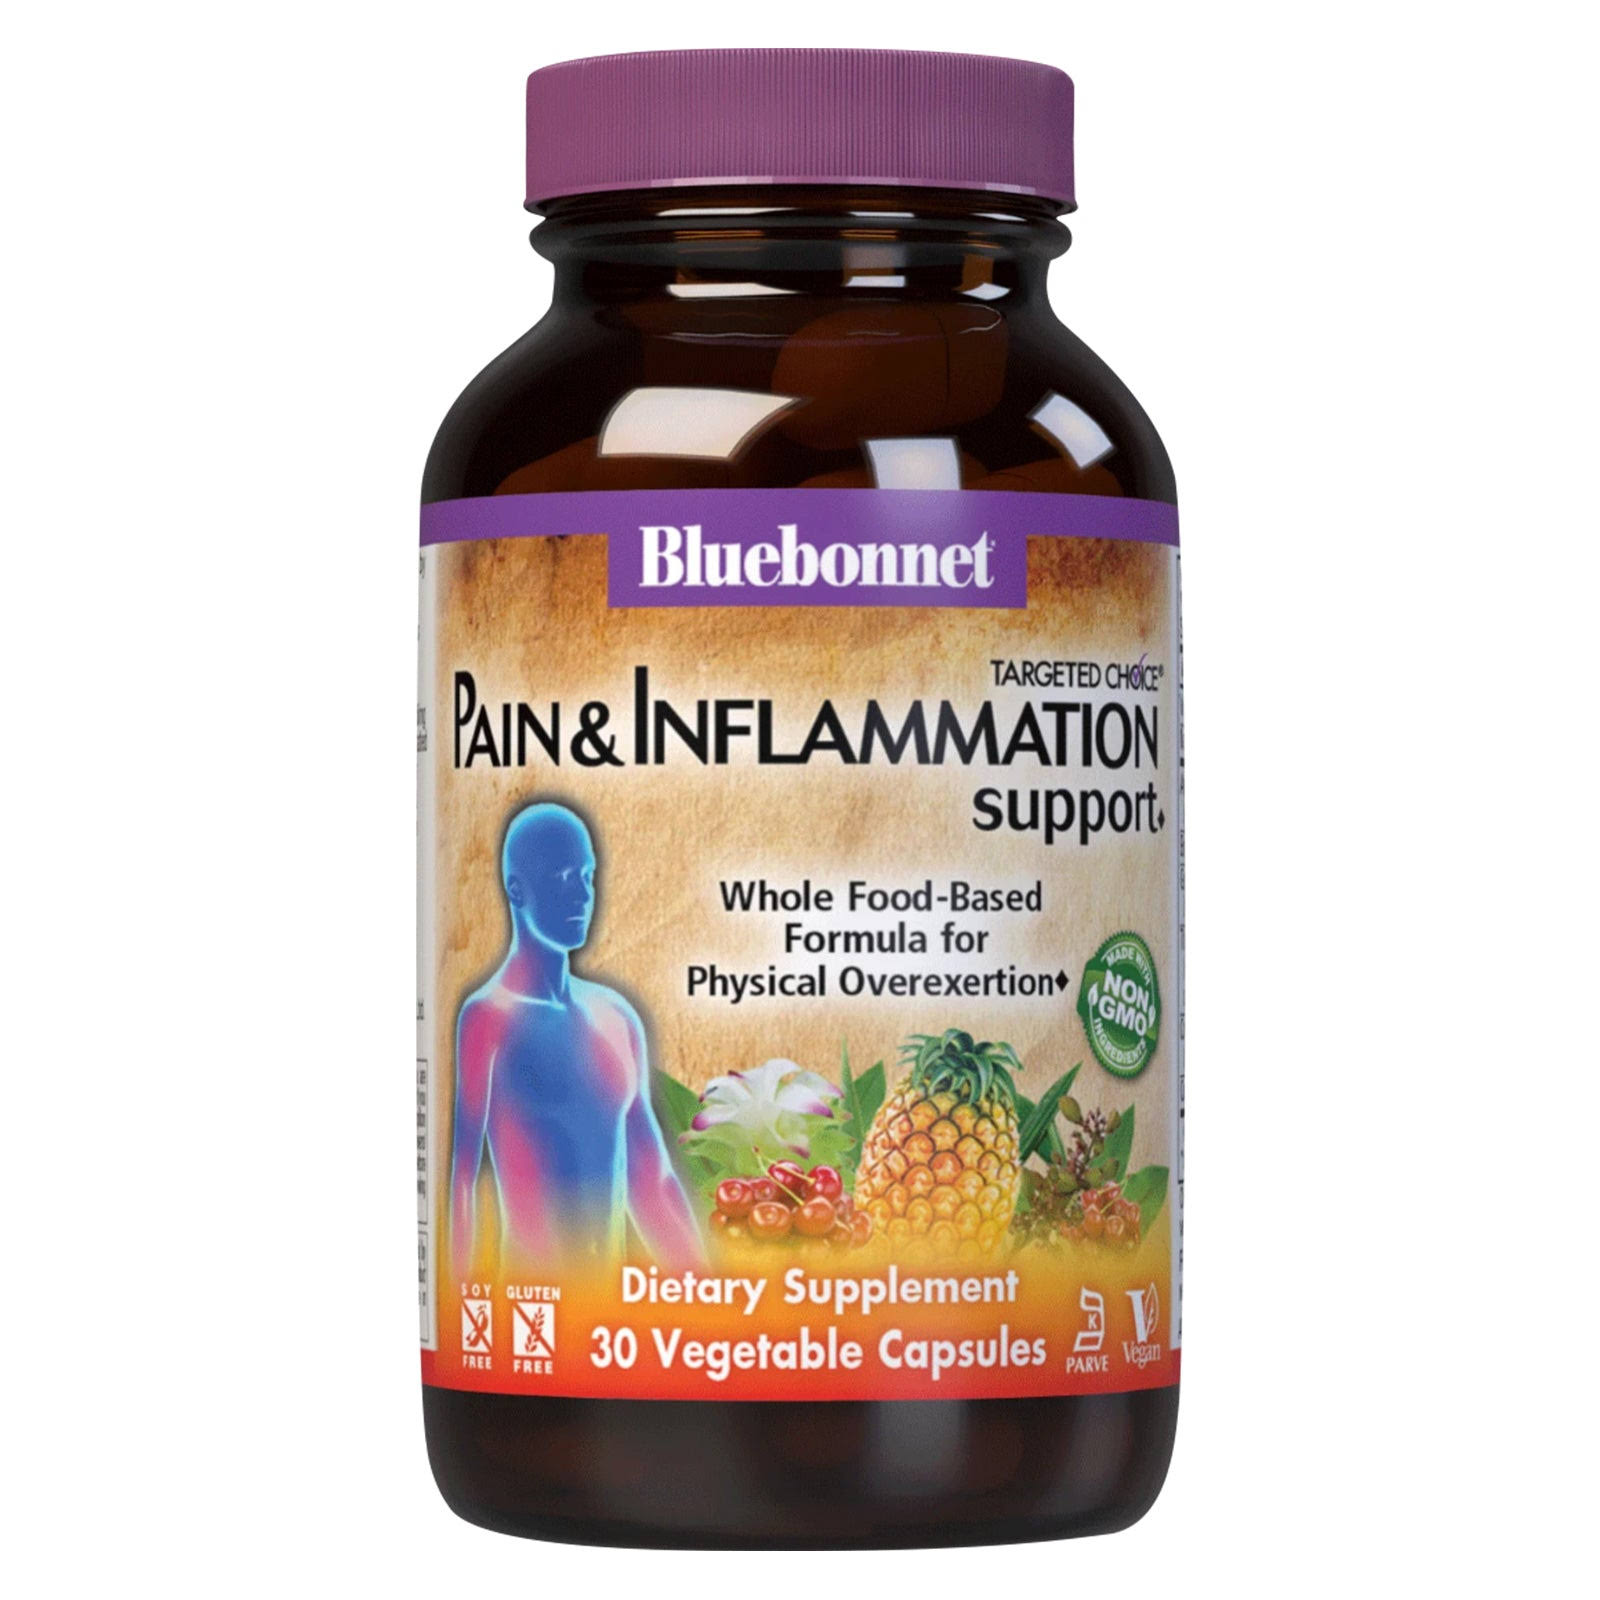 Bluebonnet Nutrition Targeted Choice Pain & Inflammation Support - 30